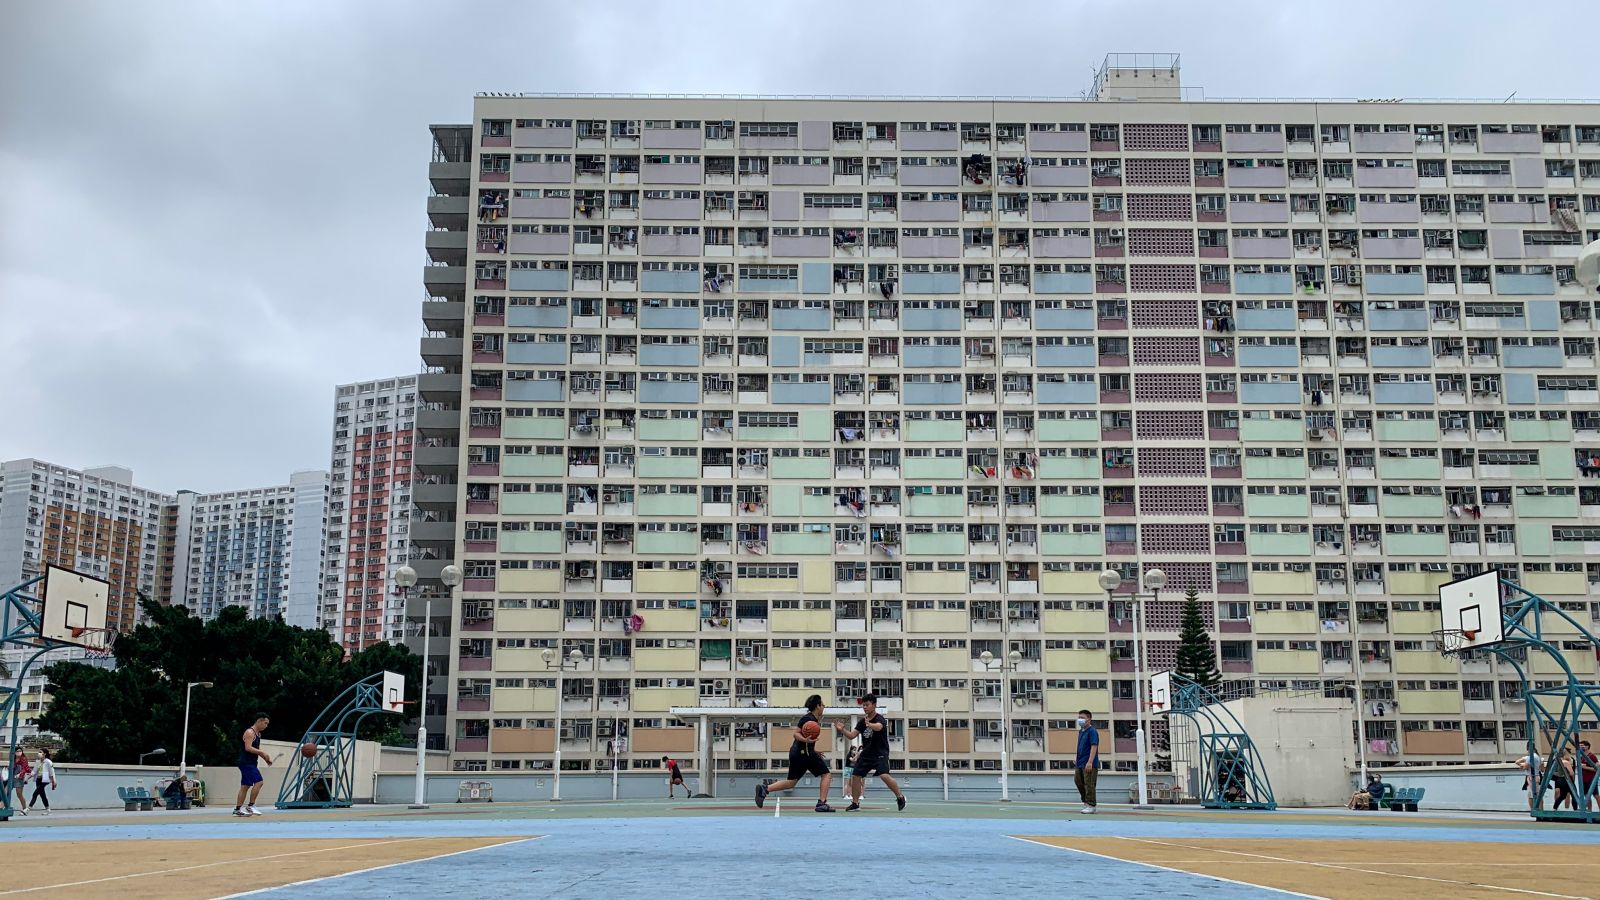 Teens Playing Basketball. iPhone XR